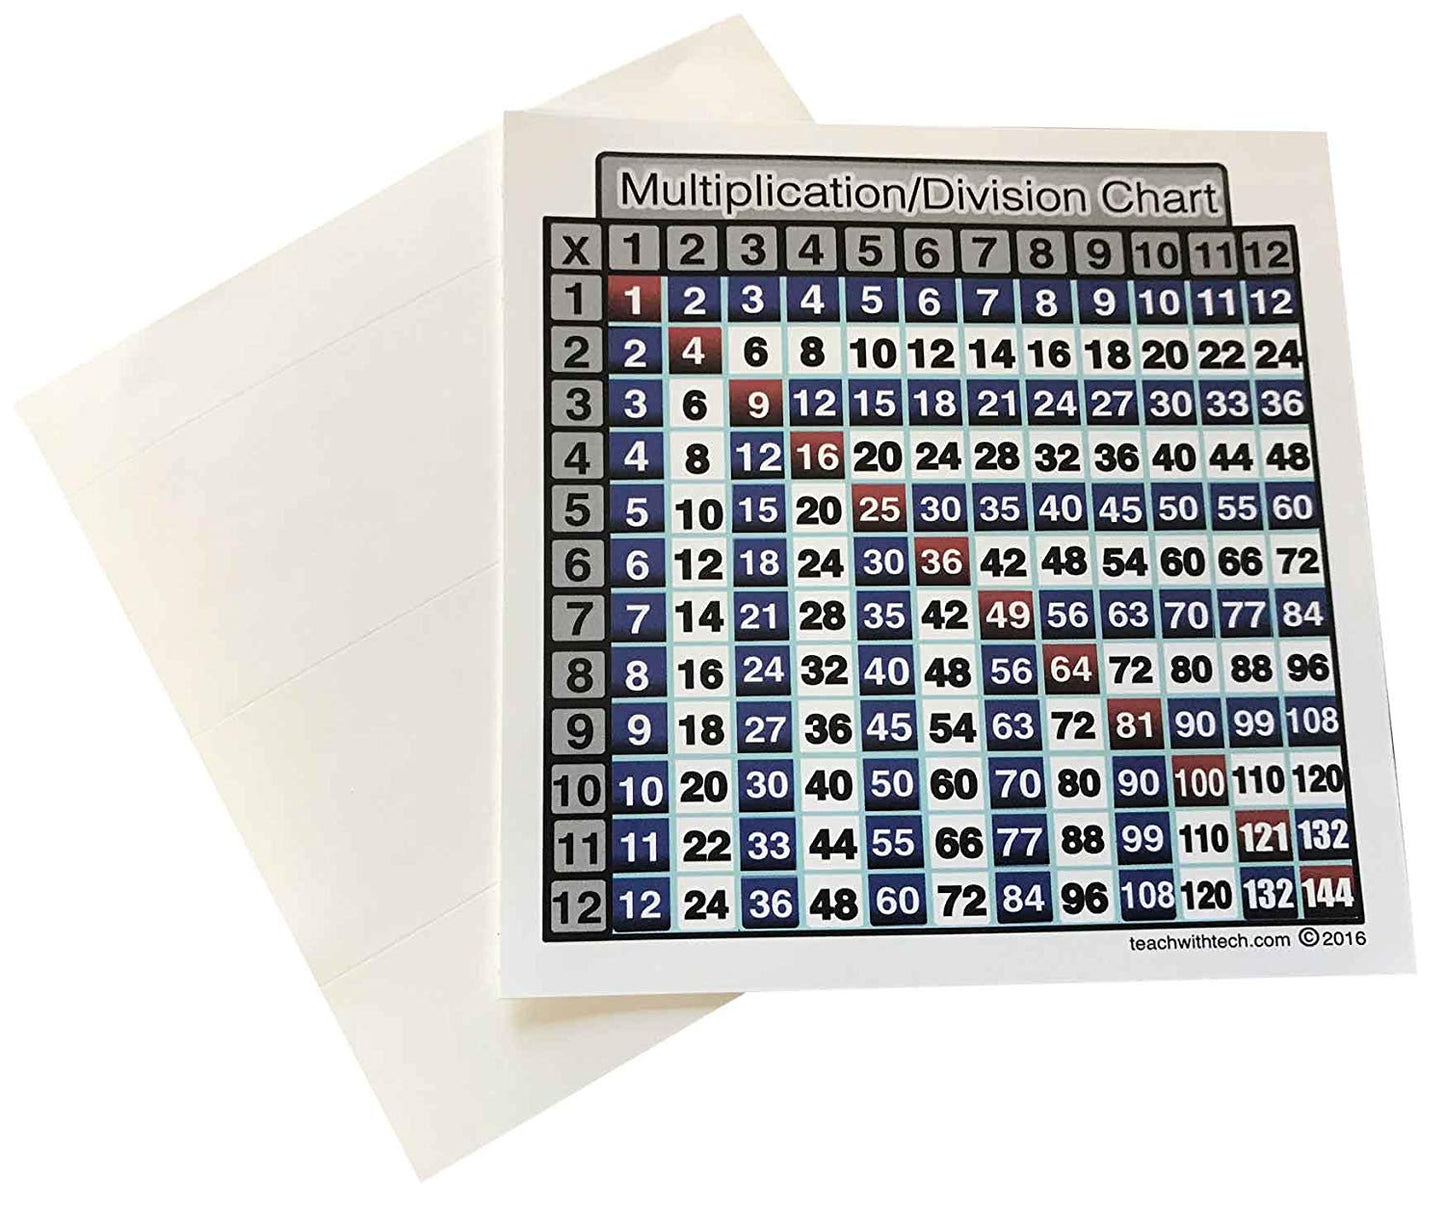 Glossy Multiplication Sticker 4 IN. X 4 IN. with Crack and Peel Backing